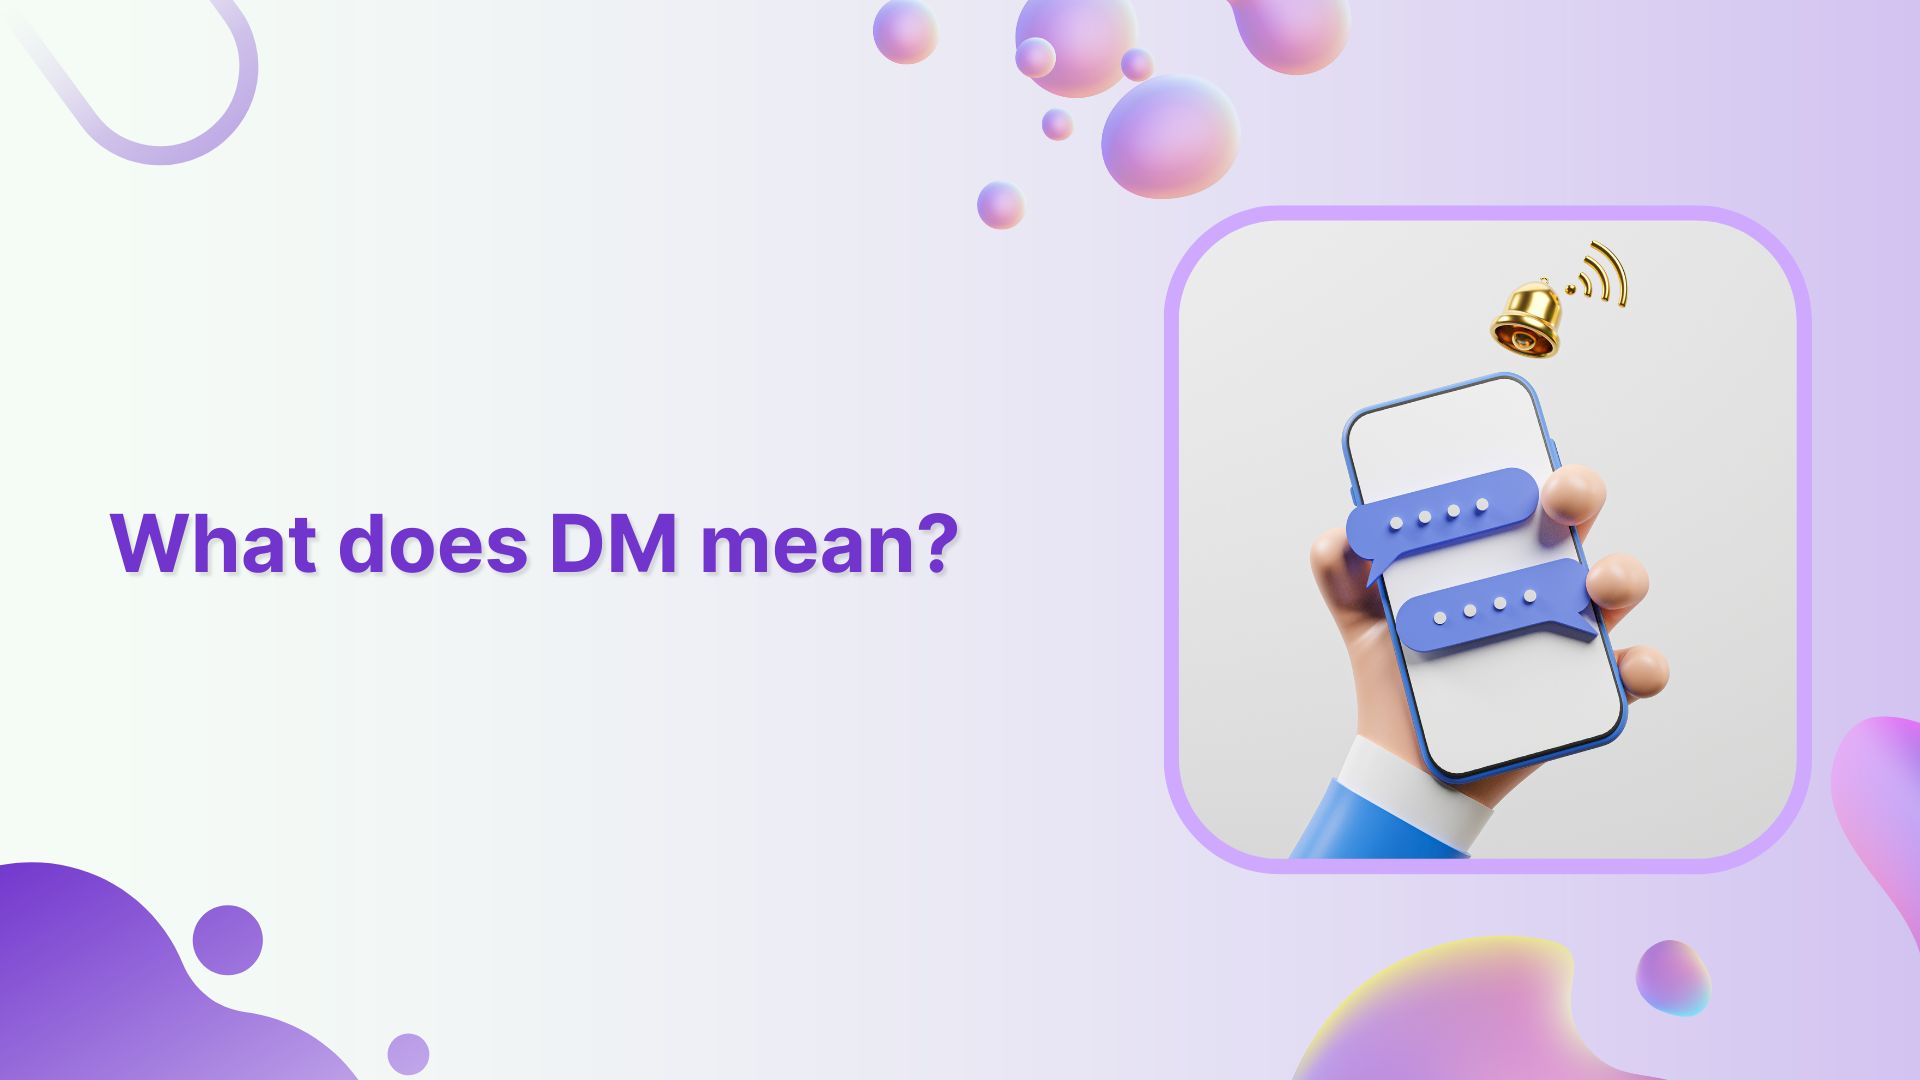 What does DM mean?